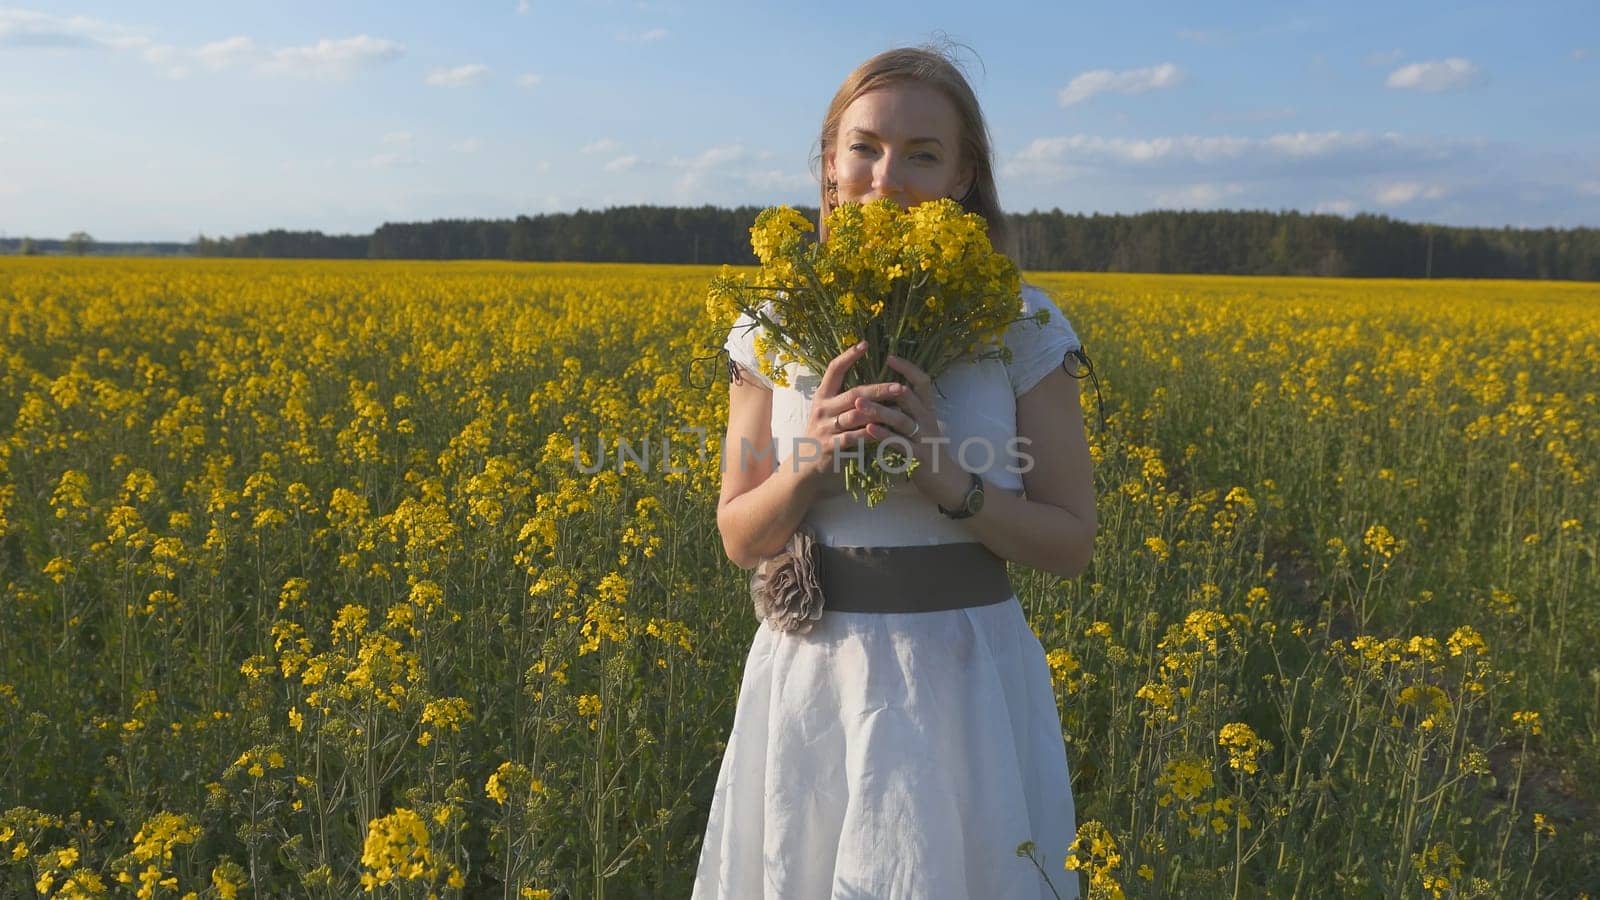 A girl in a white dress is walking among a rapeseed field. by DovidPro